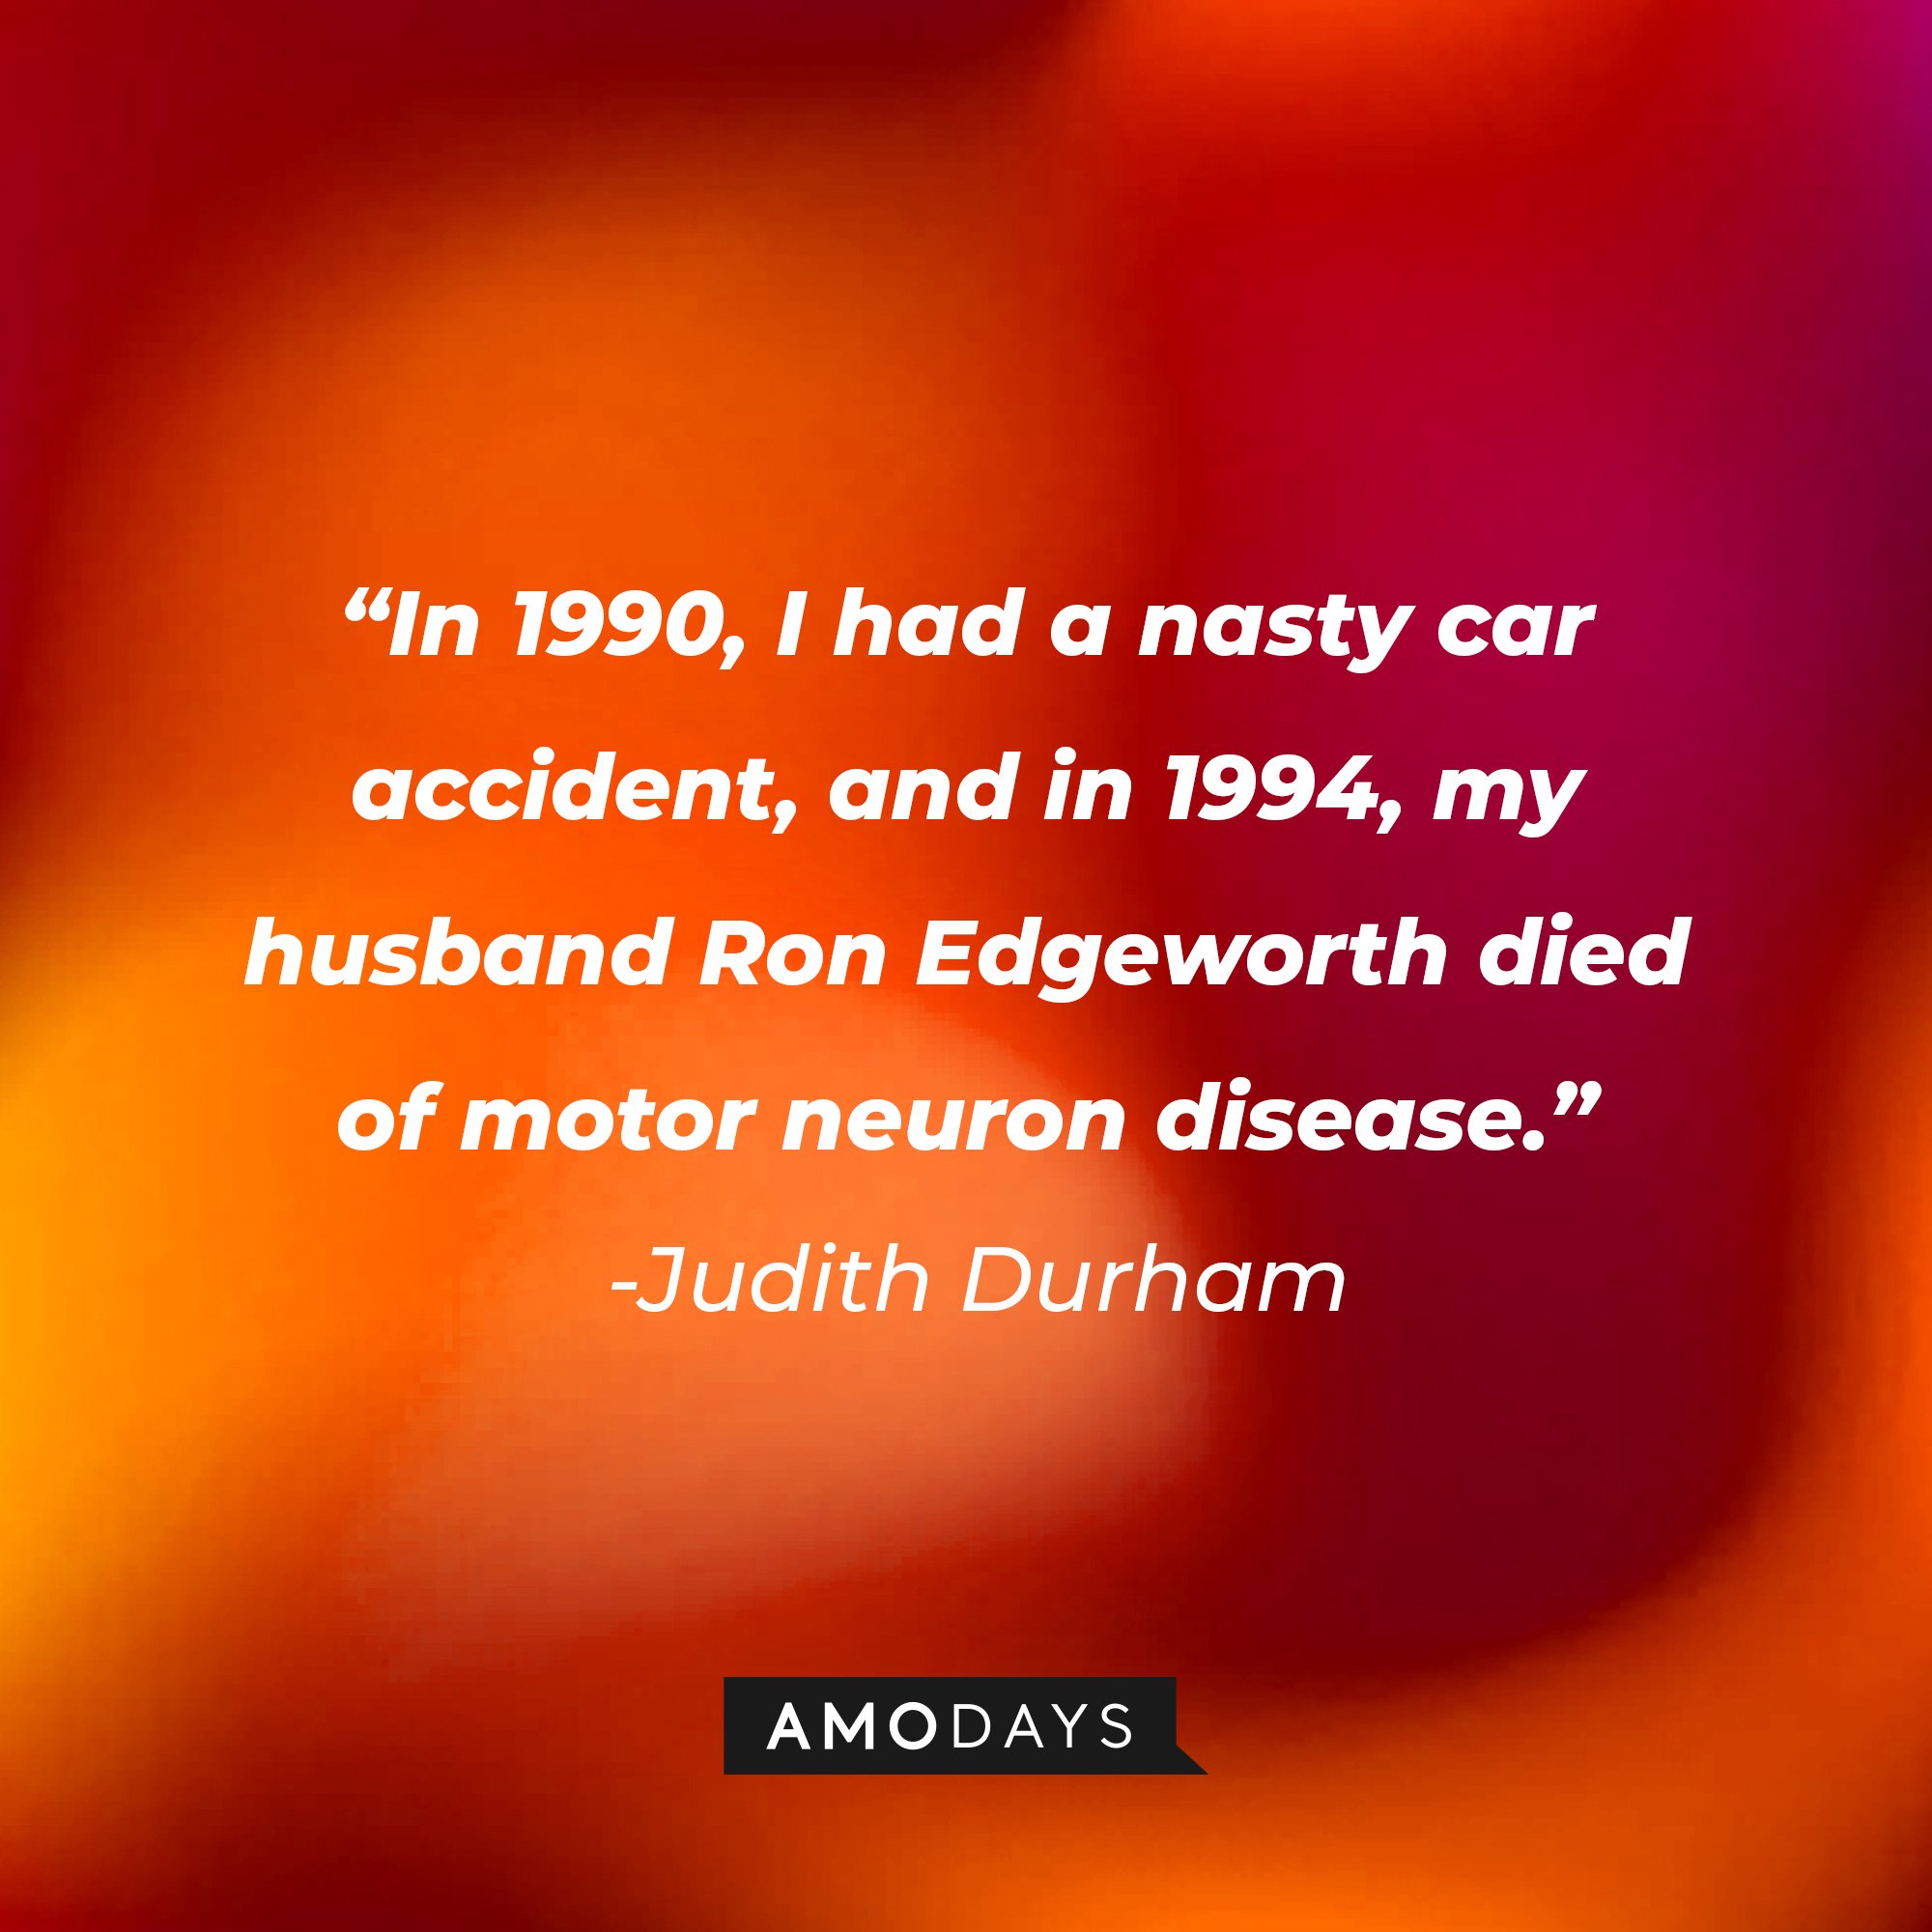 Judith Durham’s quote: "In 1990, I had a nasty car accident, and in 1994, my husband Ron Edgeworth died of motor neuron disease." | Image: AmoDays 